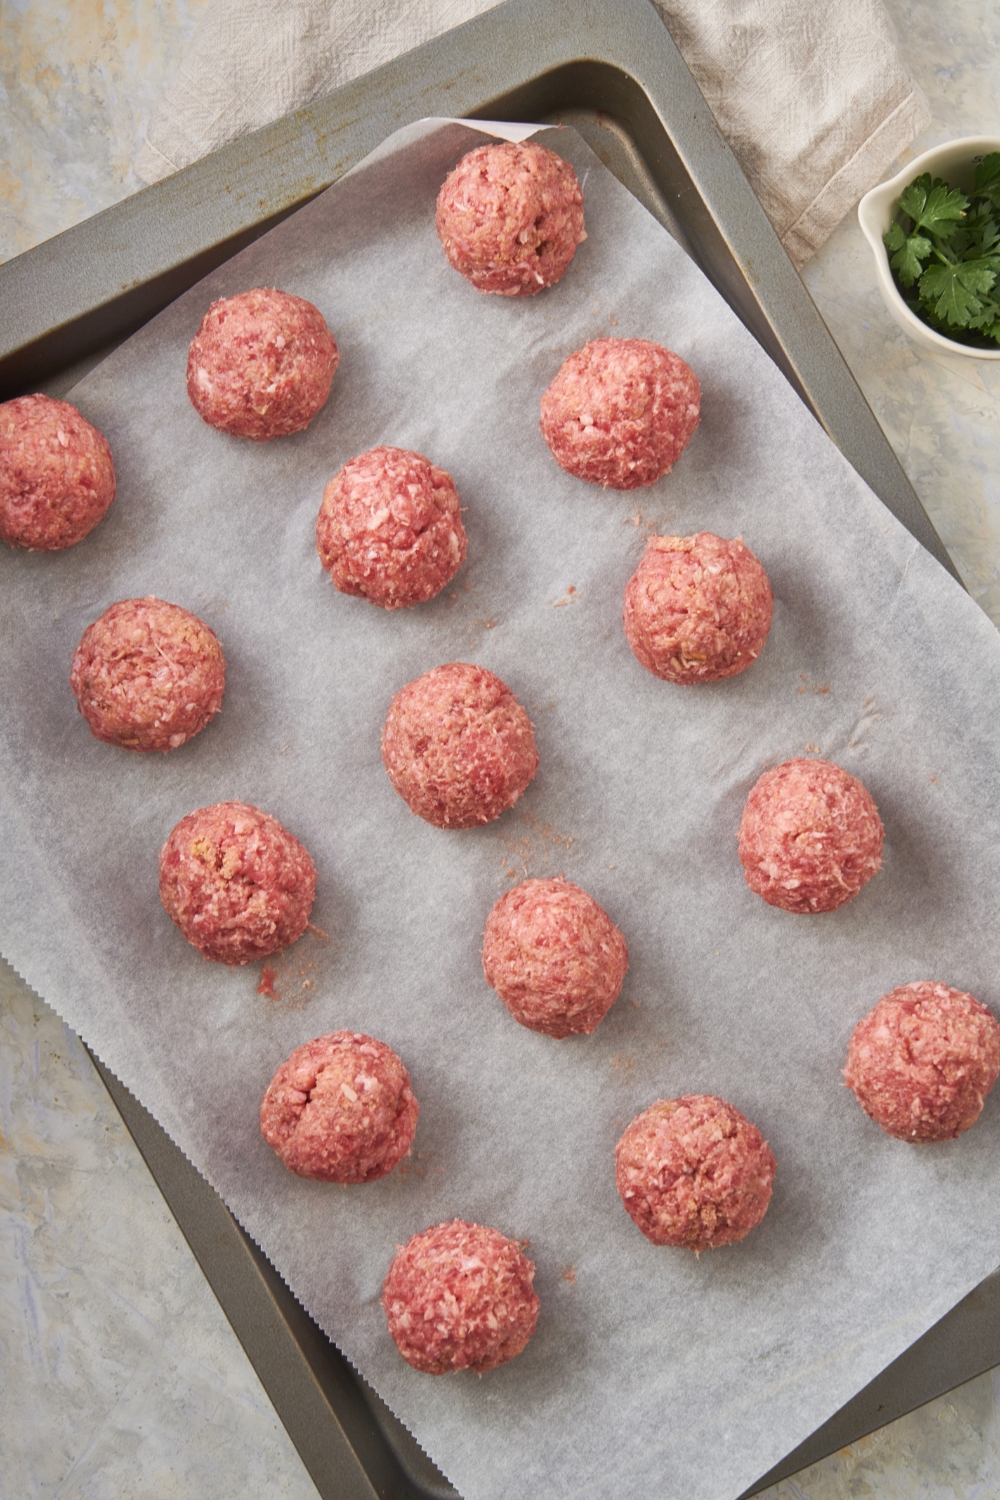 Fifteen unbaked meatballs spread evenly on a baking sheet lined with parchment paper.